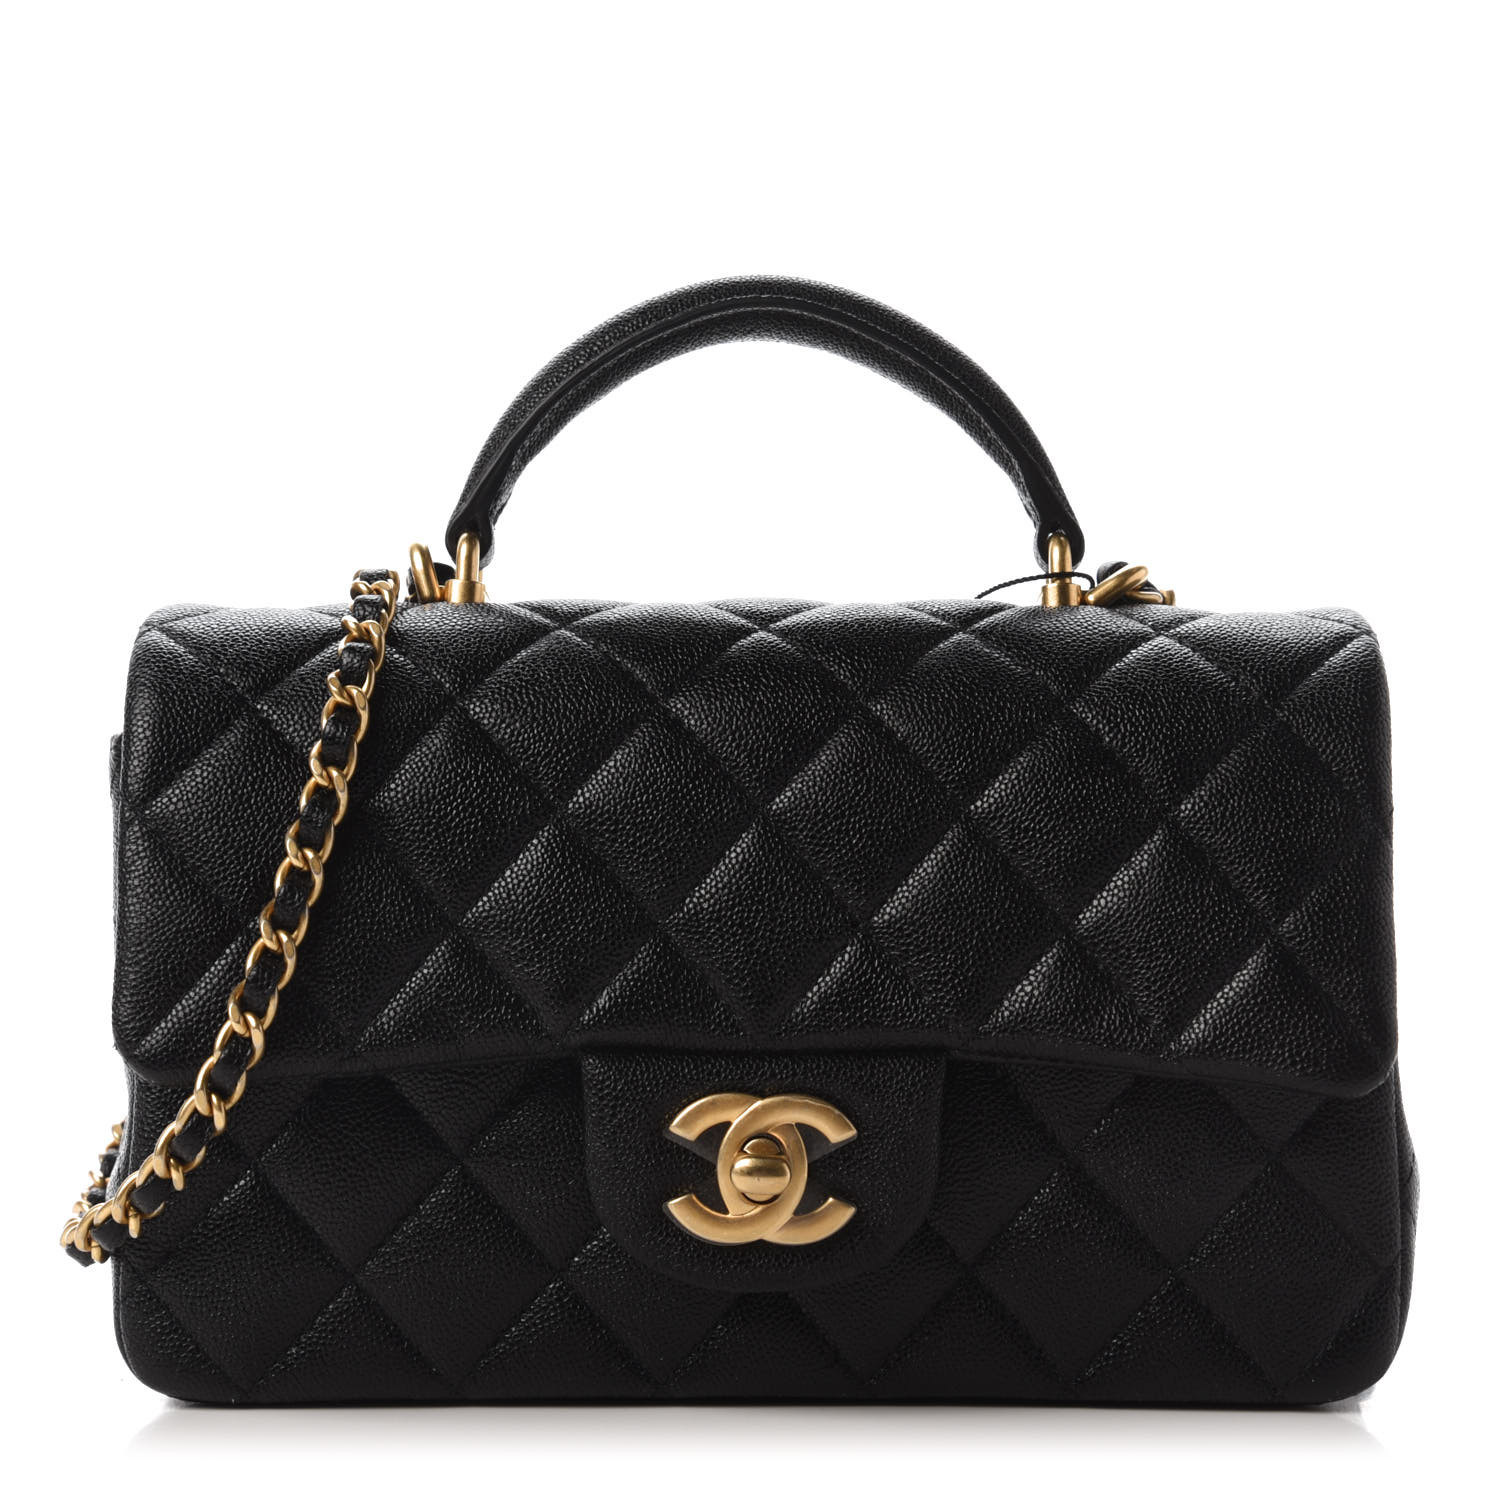 Your Favorite Chanel and Hermès Bags of the Season - PurseBop